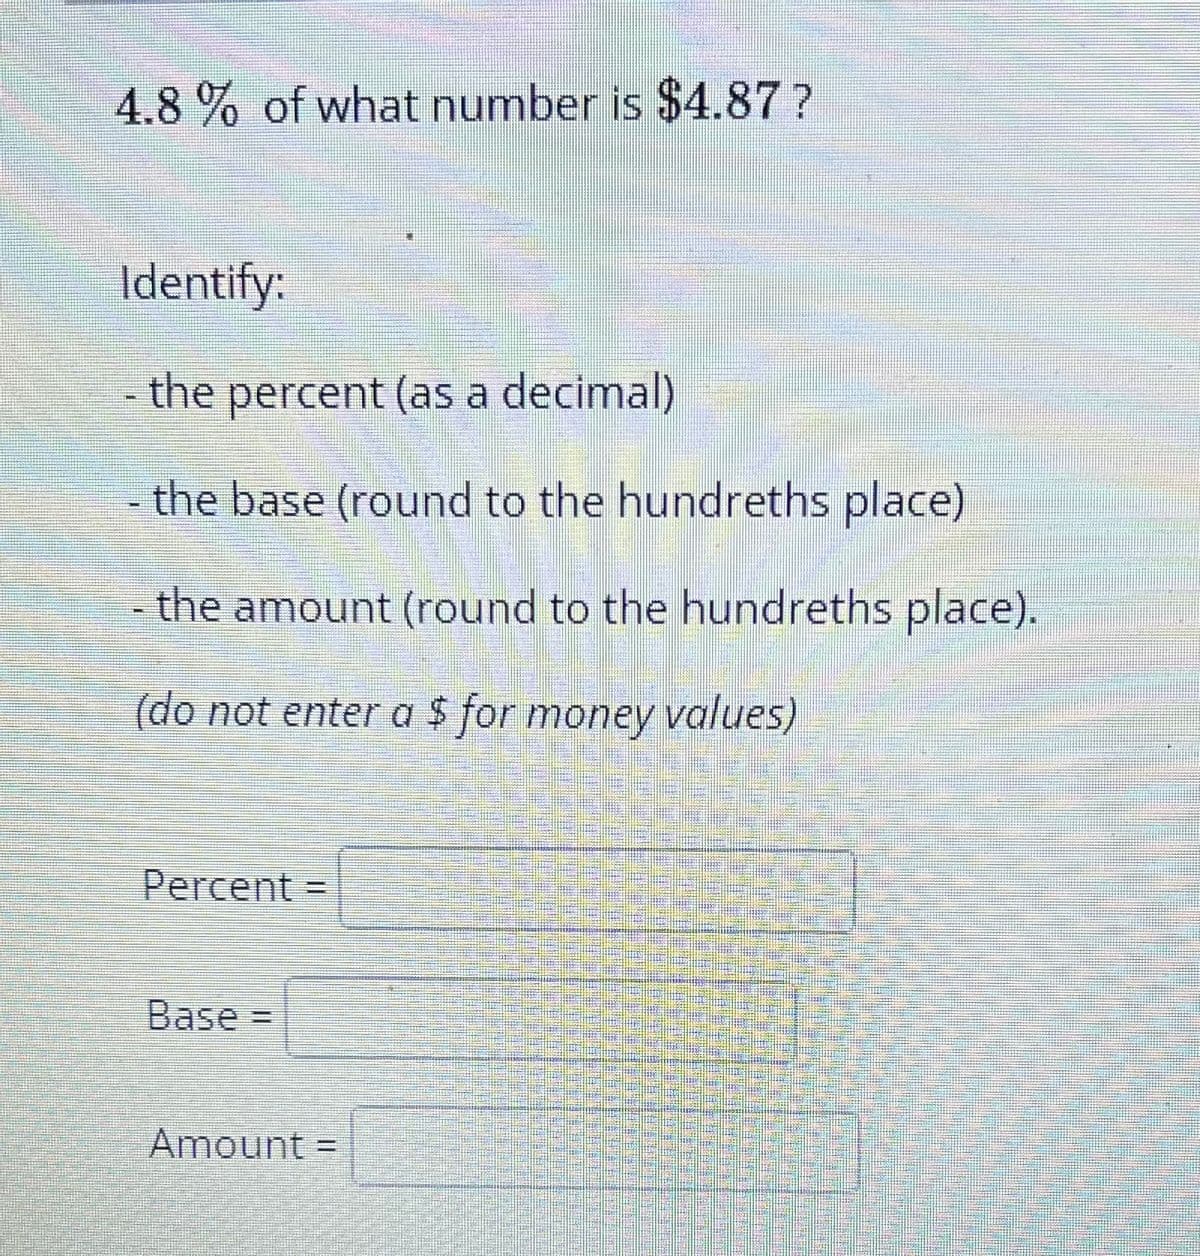 4.8% of what number is $4.87?
Identify:
the percent (as a decimal)
the base (round to the hundreths place)
- the amount (round to the hundreths place).
(do not enter a $ for money values)
Percent
Base=
Amount =
sa ma a ma sa
San.
dan in a la parten
Share